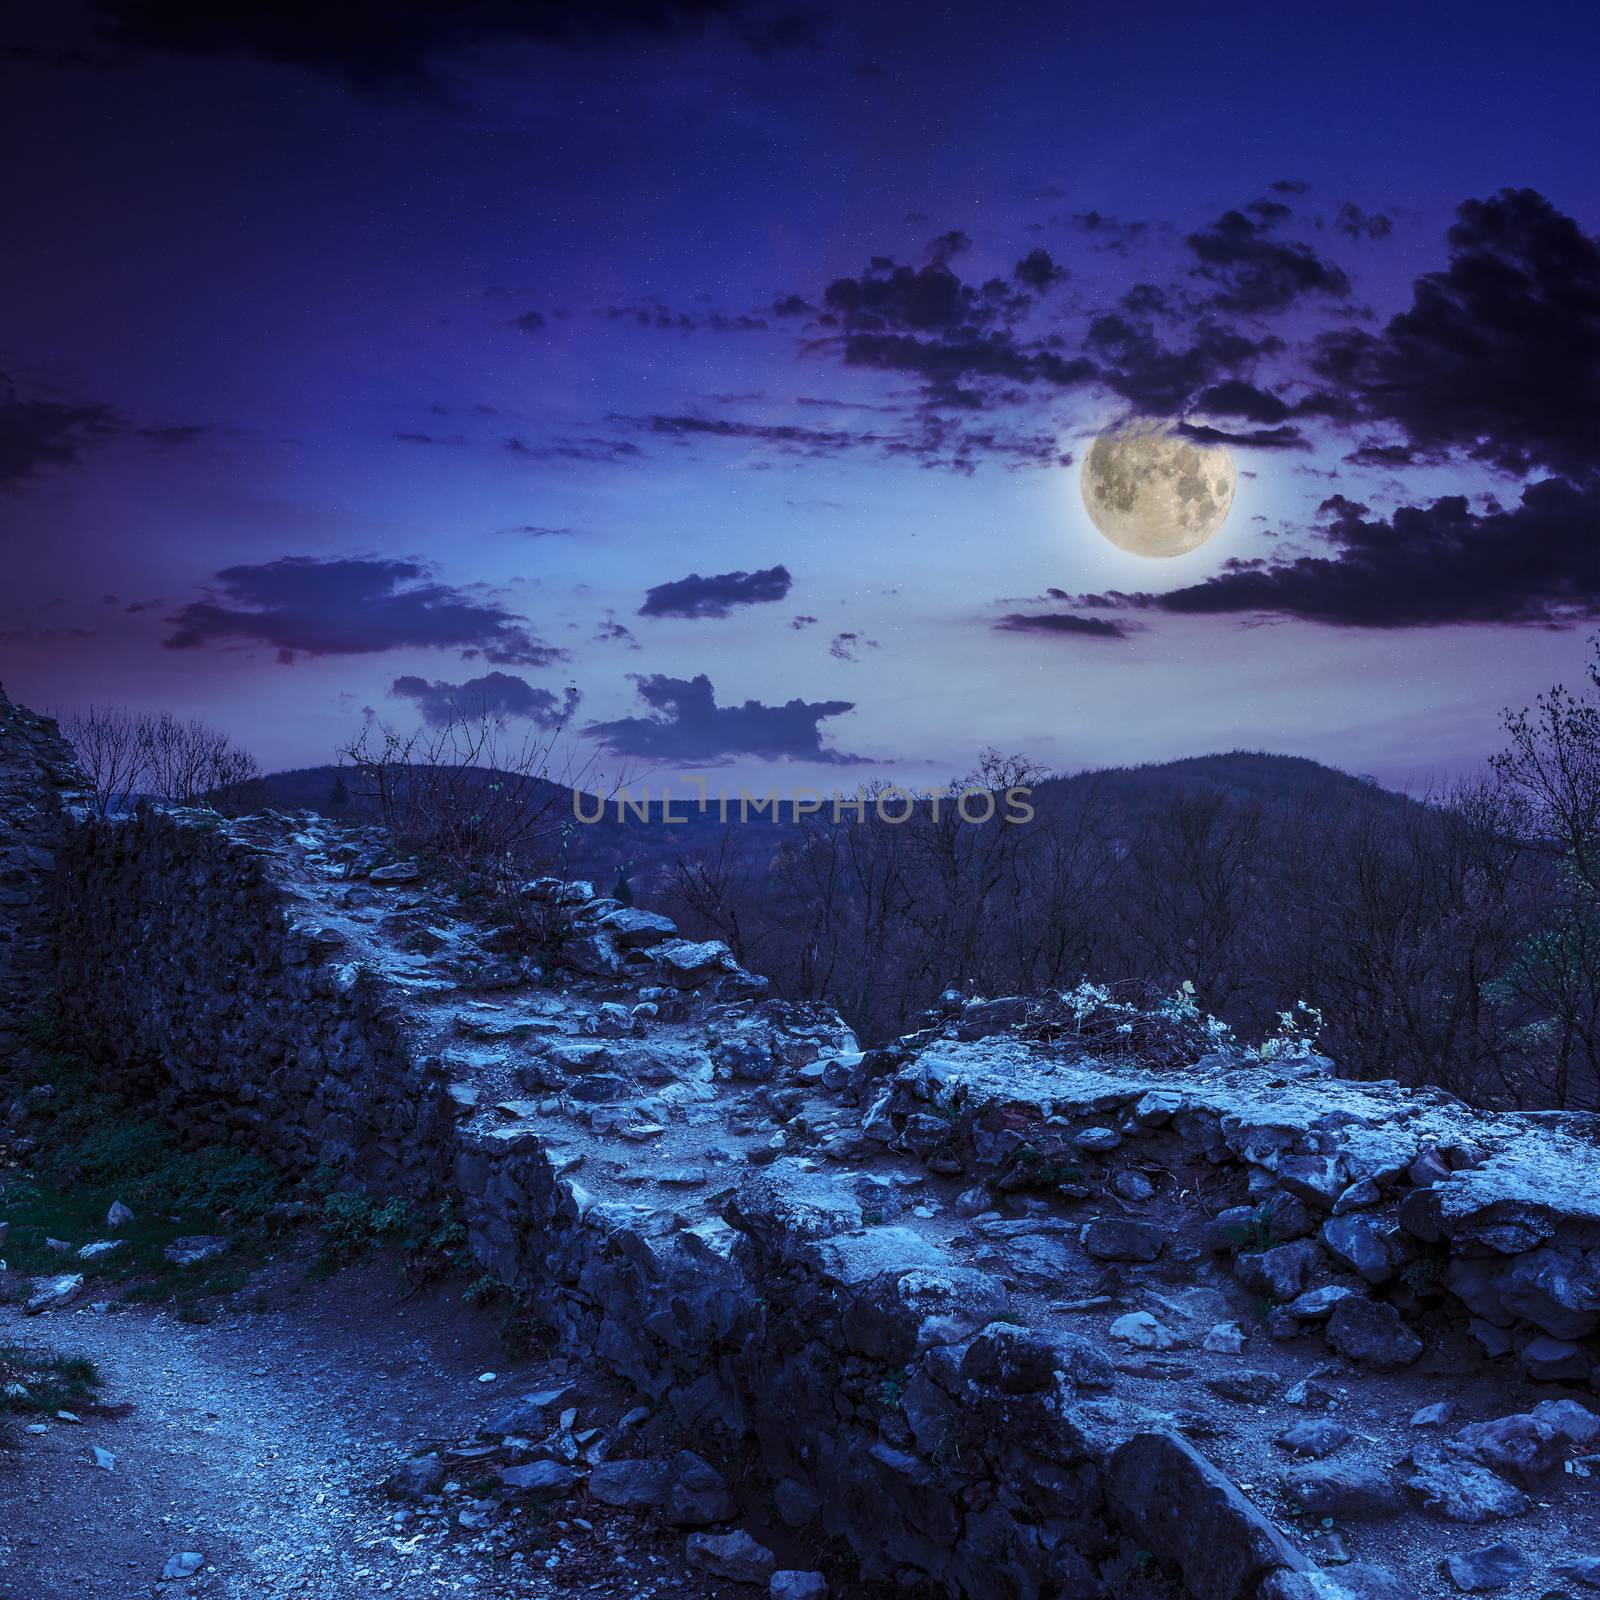 ruins of an old castle in the mountains at night by Pellinni